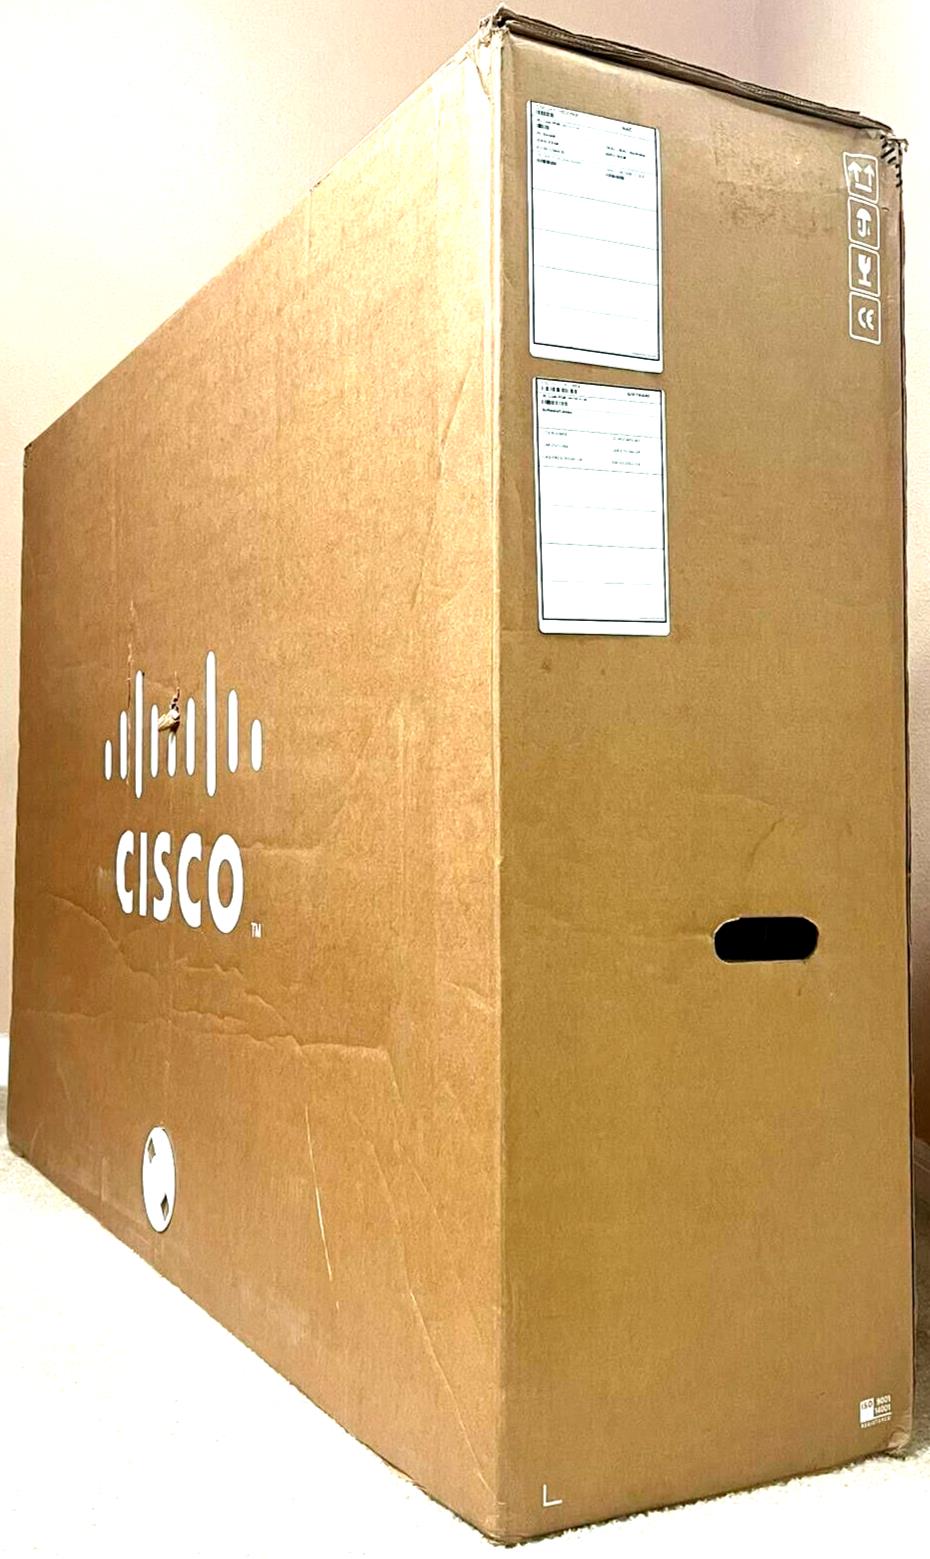 Cisco CS-ROOM55-NR-K9 Webex Room Video Conference Equipment Kit with Touch 10